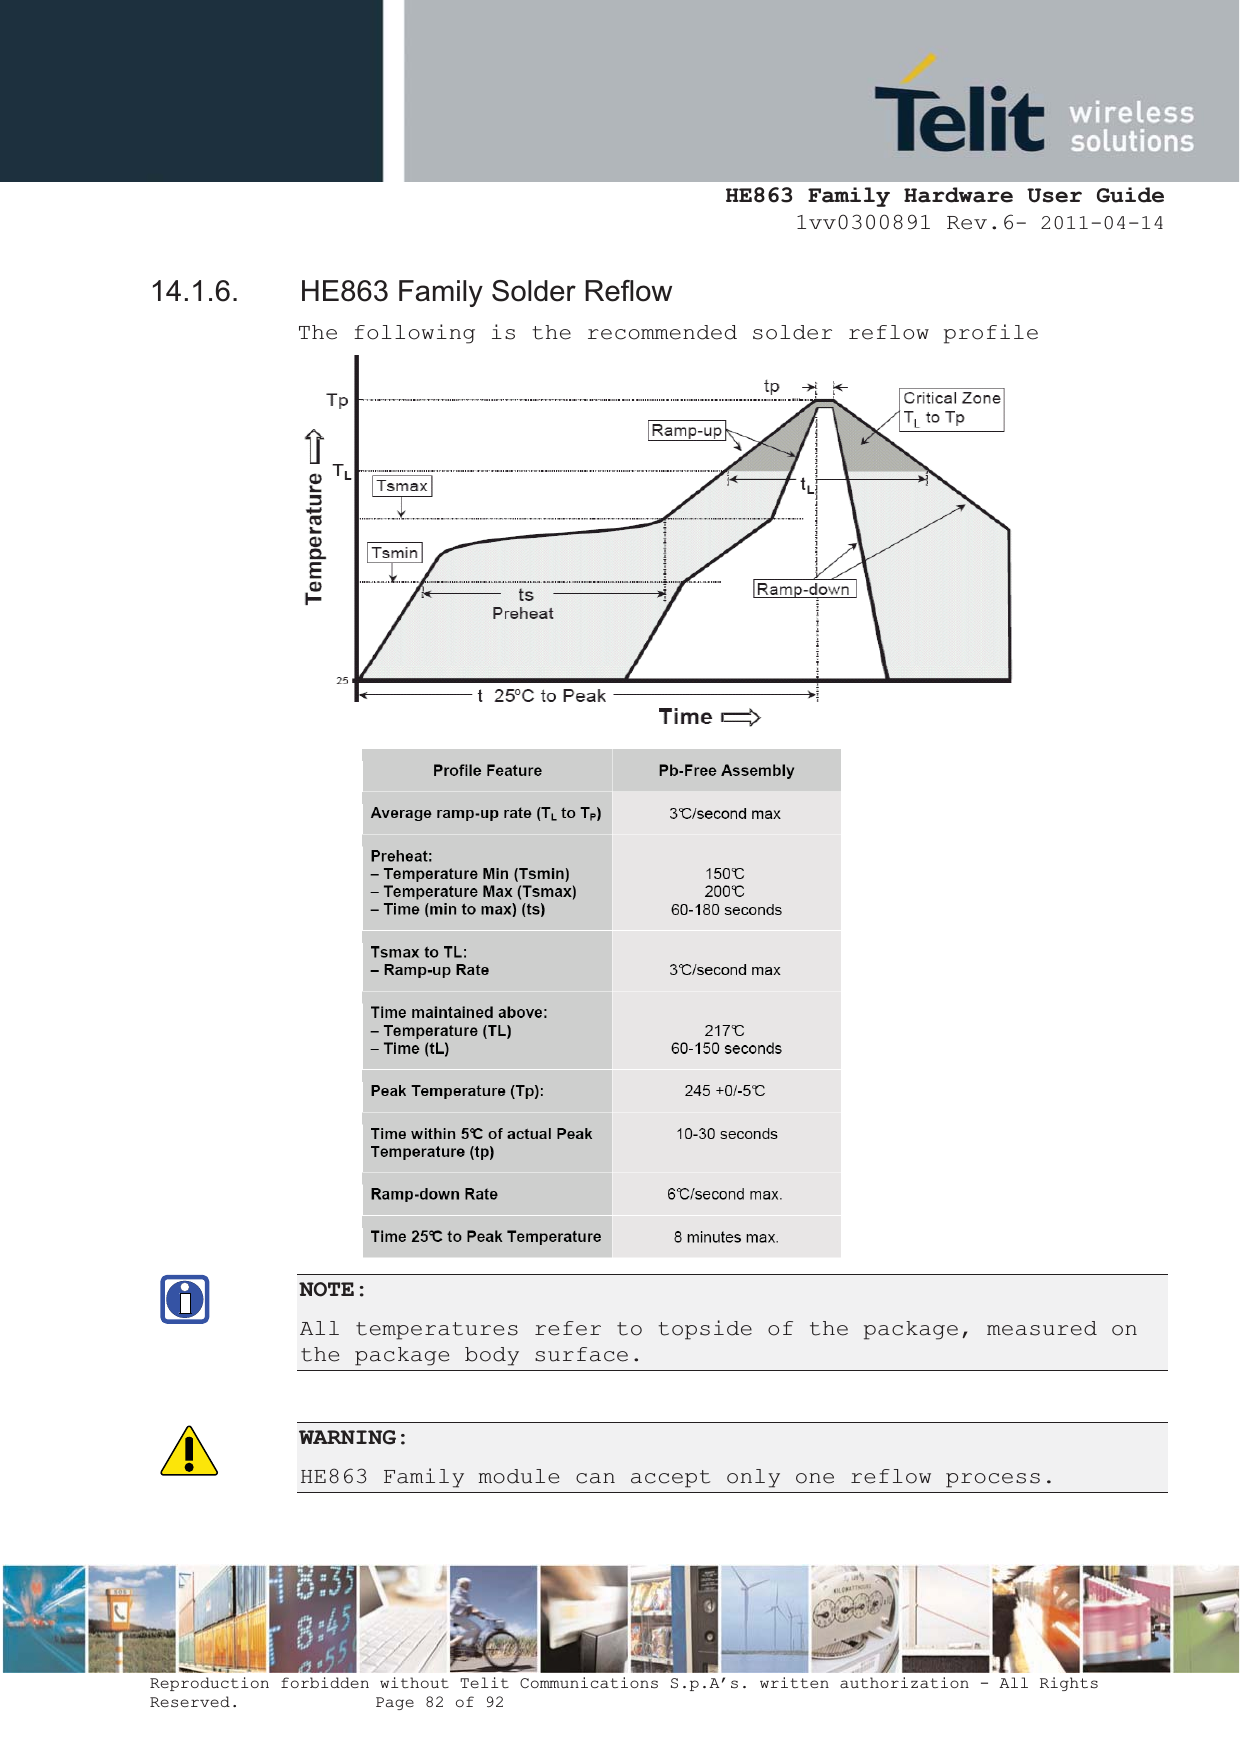  HE863 Family Hardware User Guide 1vv0300891 Rev.6- 2011-04-14    Reproduction forbidden without Telit Communications S.p.A’s. written authorization - All Rights Reserved.    Page 82 of 92  14.1.6.  HE863 Family Solder Reflow The following is the recommended solder reflow profile   NOTE:All temperatures refer to topside of the package, measured on the package body surface.  WARNING:HE863 Family module can accept only one reflow process.  